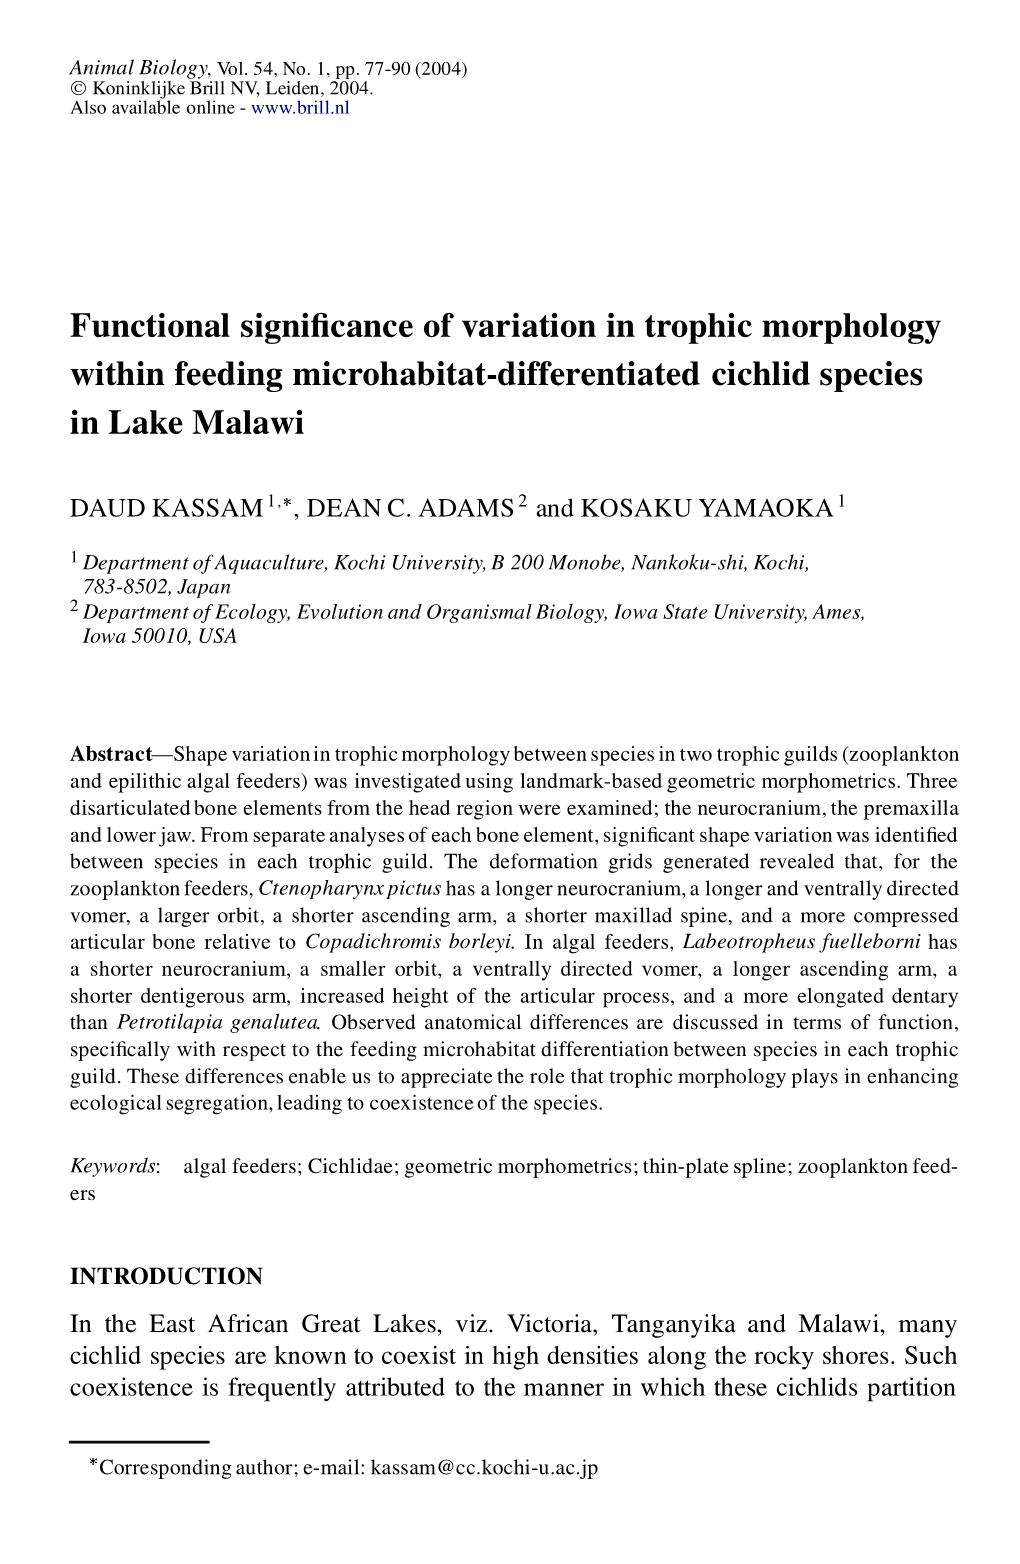 Functional Significance of Variation in Trophic Morphology Within